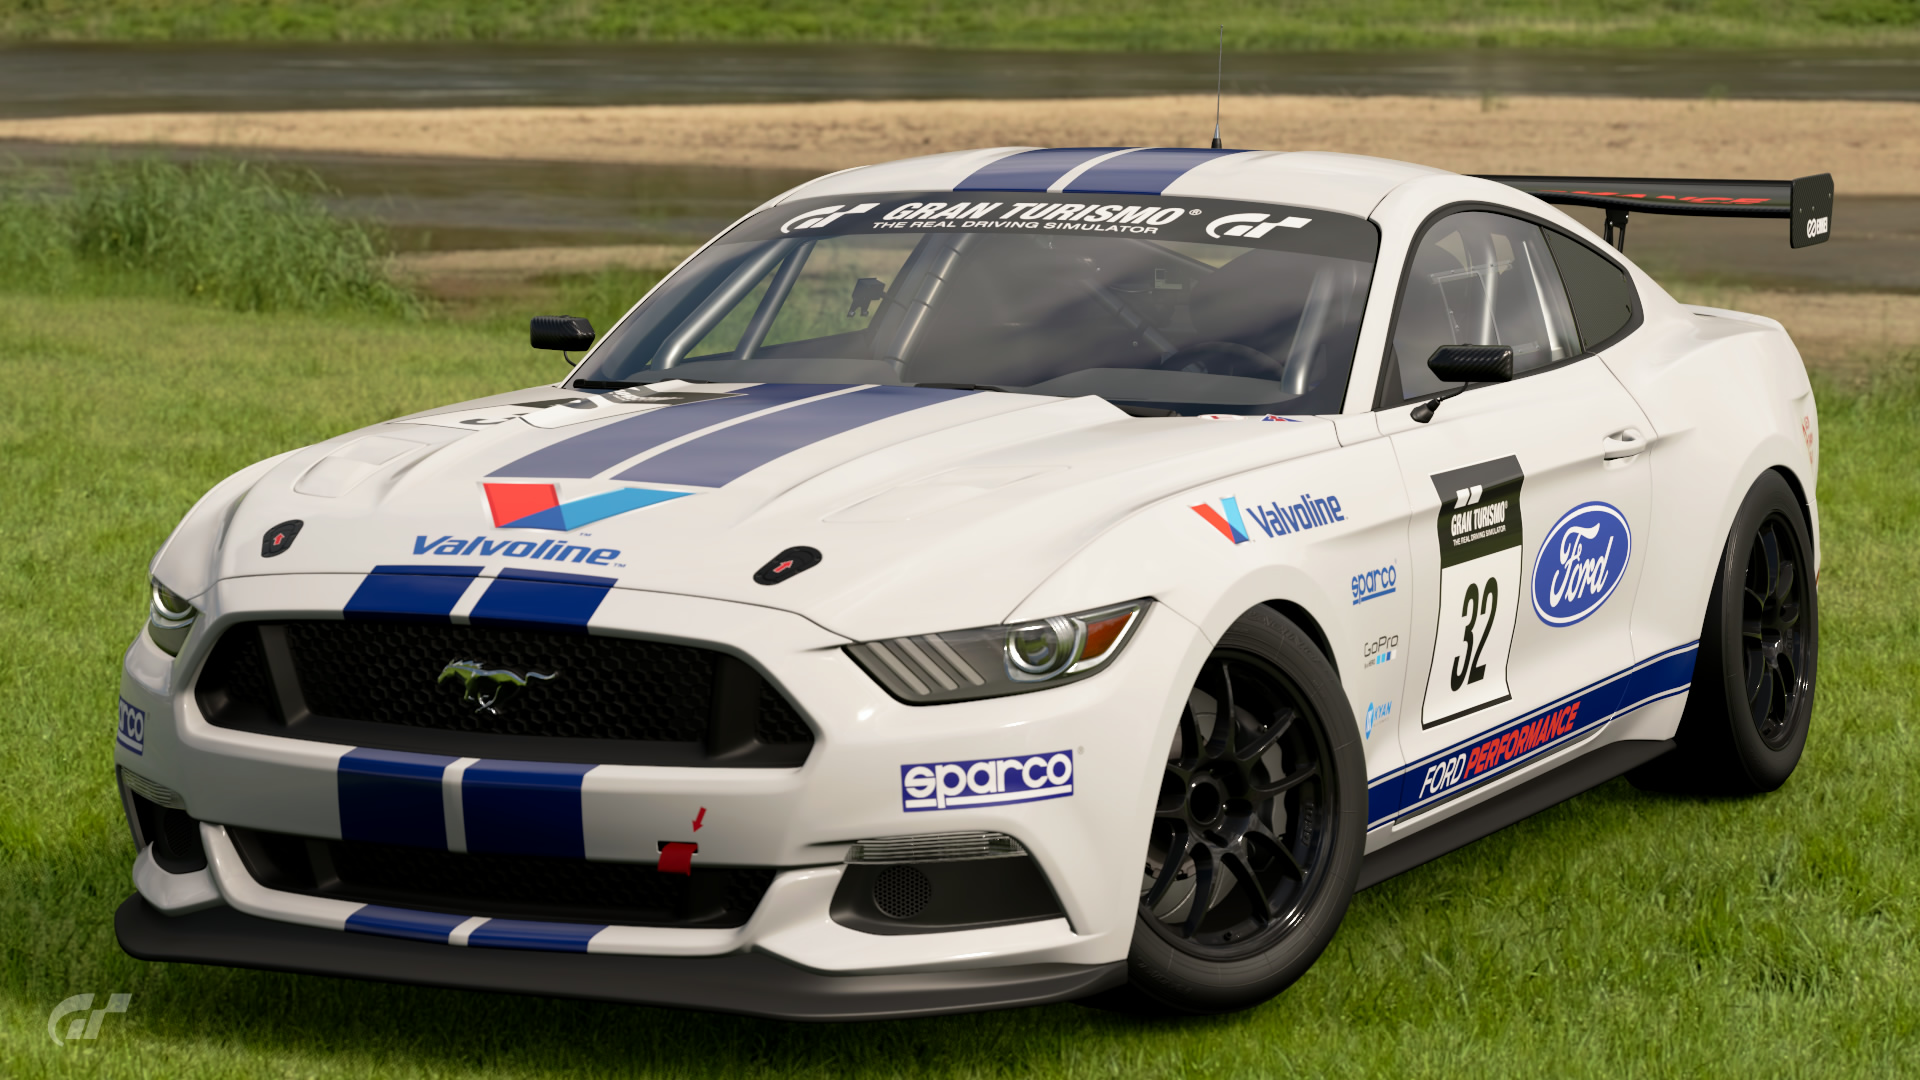 Gran Turismo 7 Mustang Gr4 by WitchWandaMaximoff on DeviantArt